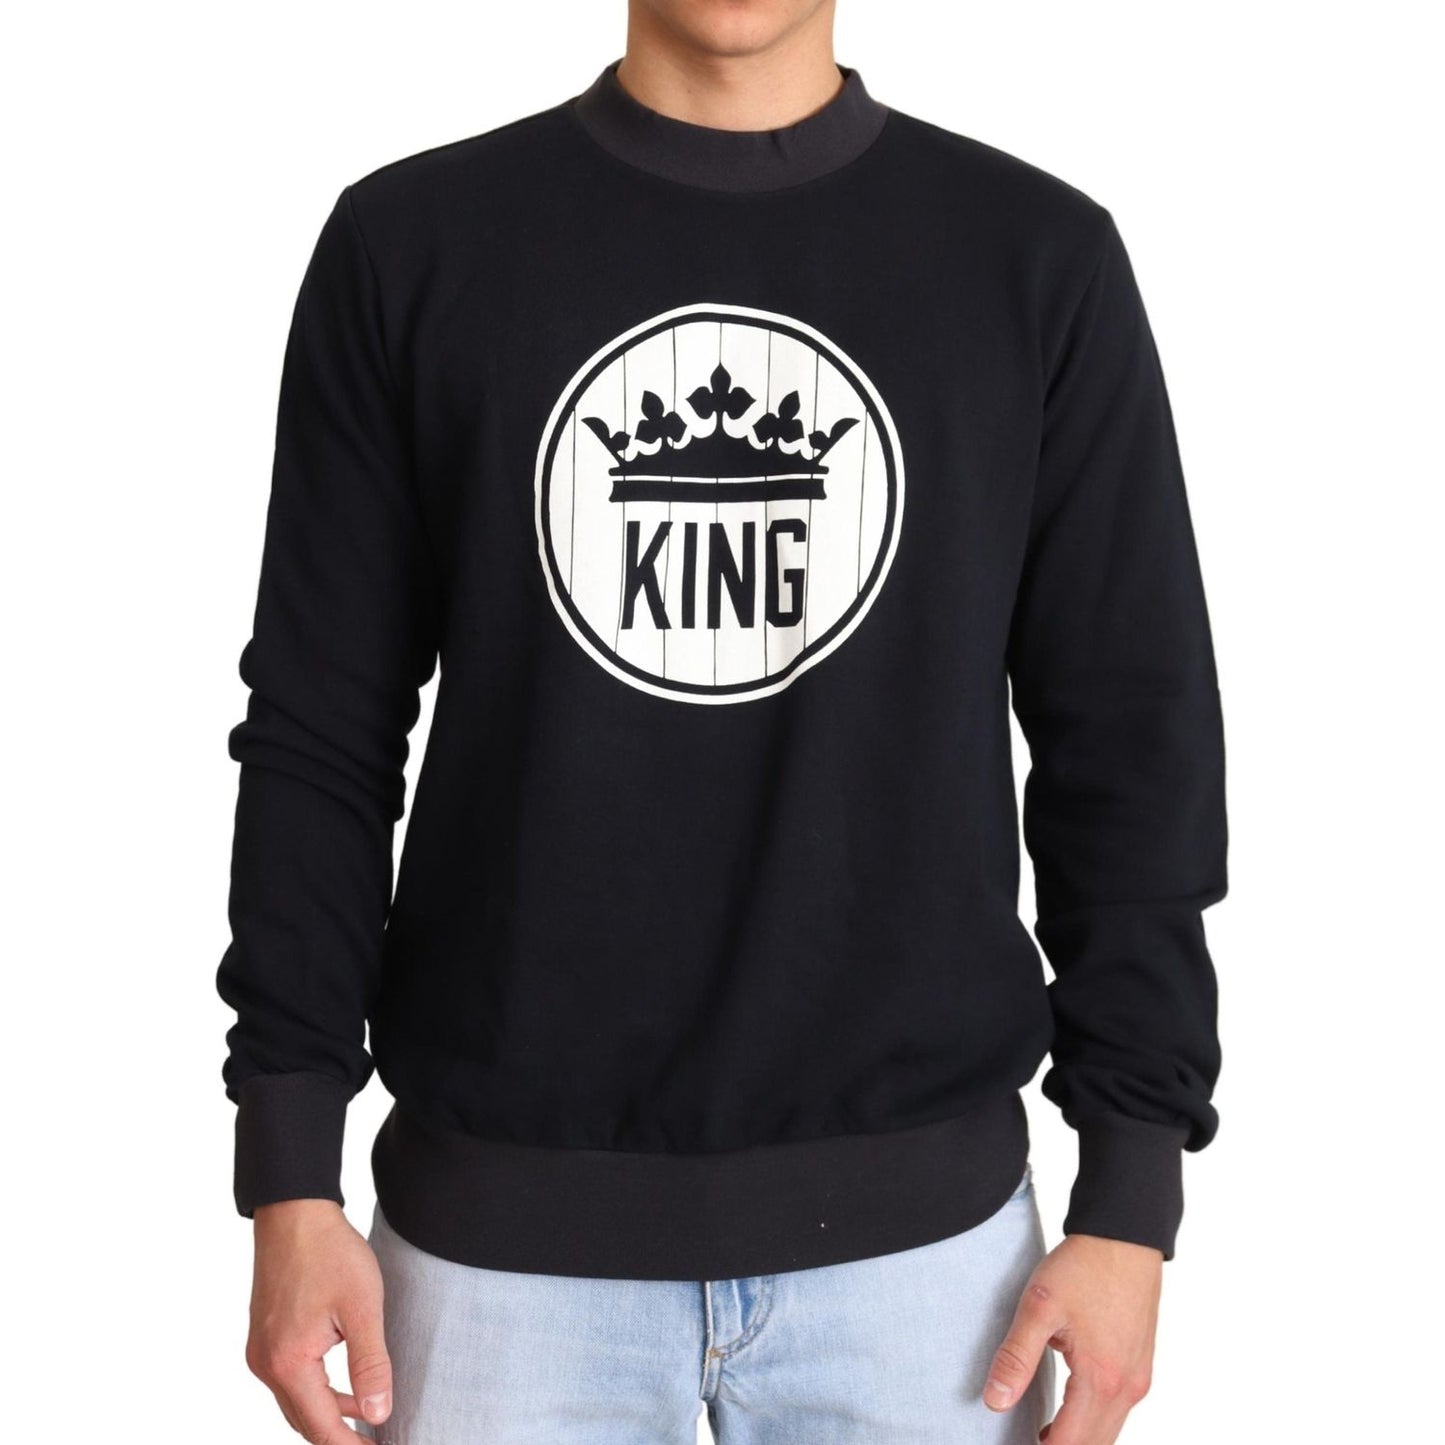 Dolce & Gabbana Blue Crown King Cotton Pullover Sweater blue-crown-king-cotton-pullover-sweater IMG_9344-scaled-479d3cf1-32c.jpg